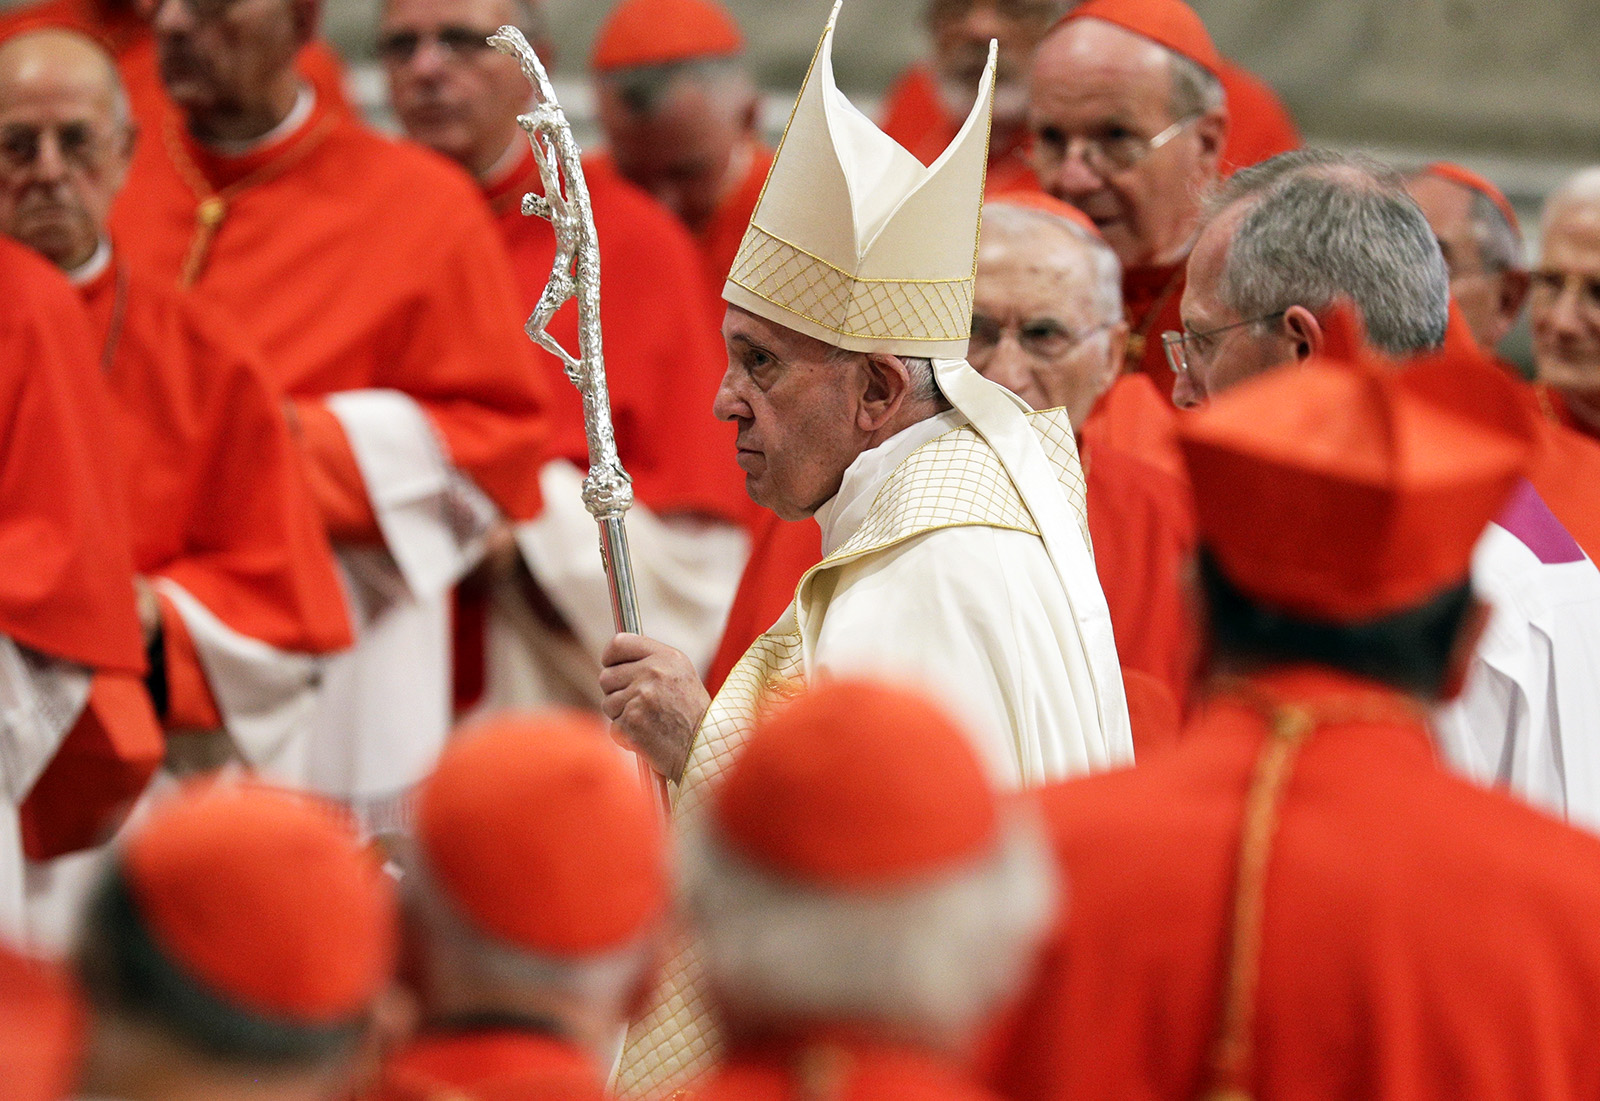 Pope Francis leaves after presiding over a consistory inside St. Peter’s Basilica, at the Vatican, Oct. 5, 2019. (AP Photo/Andrew Medichini)